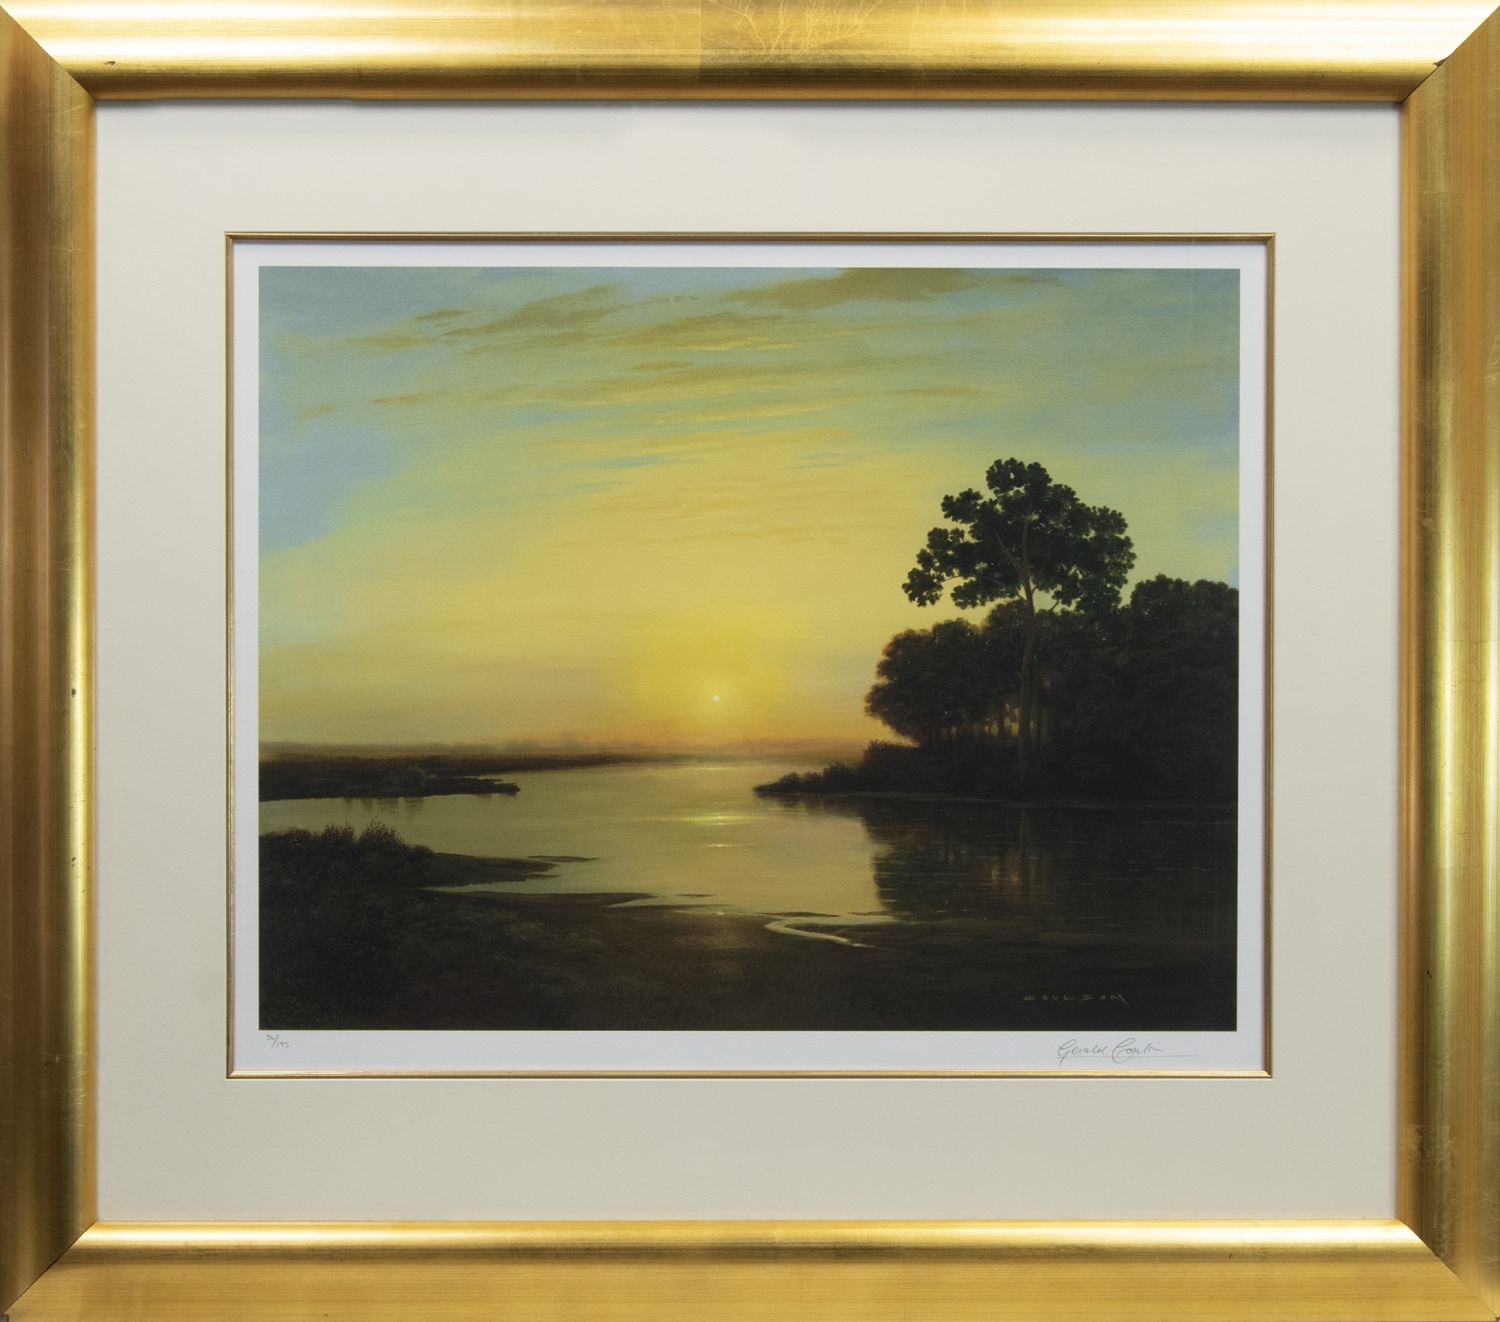 DEVON COAST AT SUNRISE, A LIMITED EDITION PRINT BY GERALD COULSON